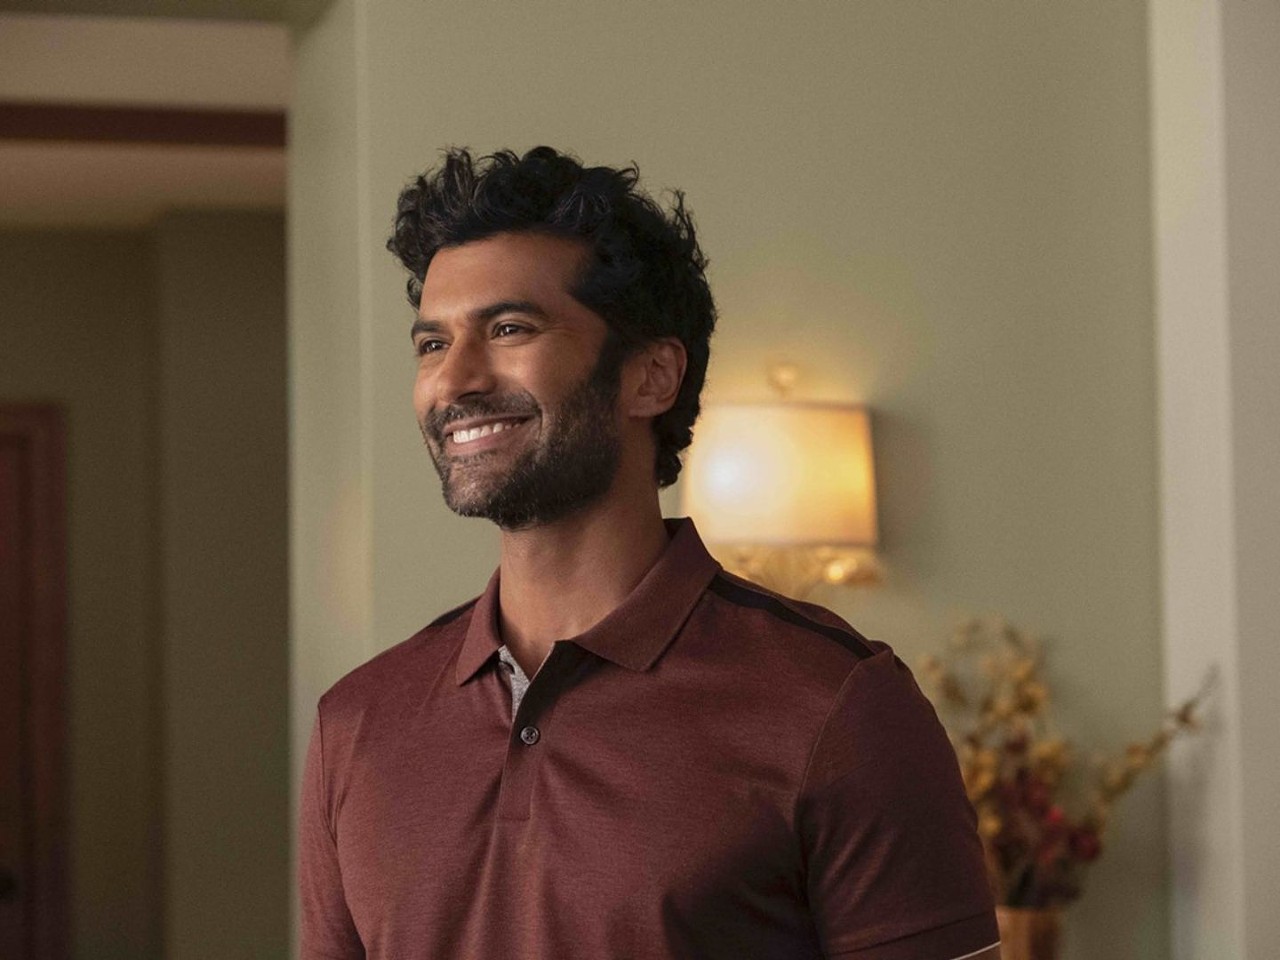 Sendhil Ramamurthy, Keystone School
Before he made a splash in shows like Covert Affairs and Heroes, Sendhil Ramamurthy gew up in the 2-1-0 and graduated from Keystone School. In addition to recent roles on TV series The Flash and New Amsterdam, Ramamurthy now plays "hot dad" Mohan Vishwakumar on Mindy Kaling's Netflix series Never Have I Ever.